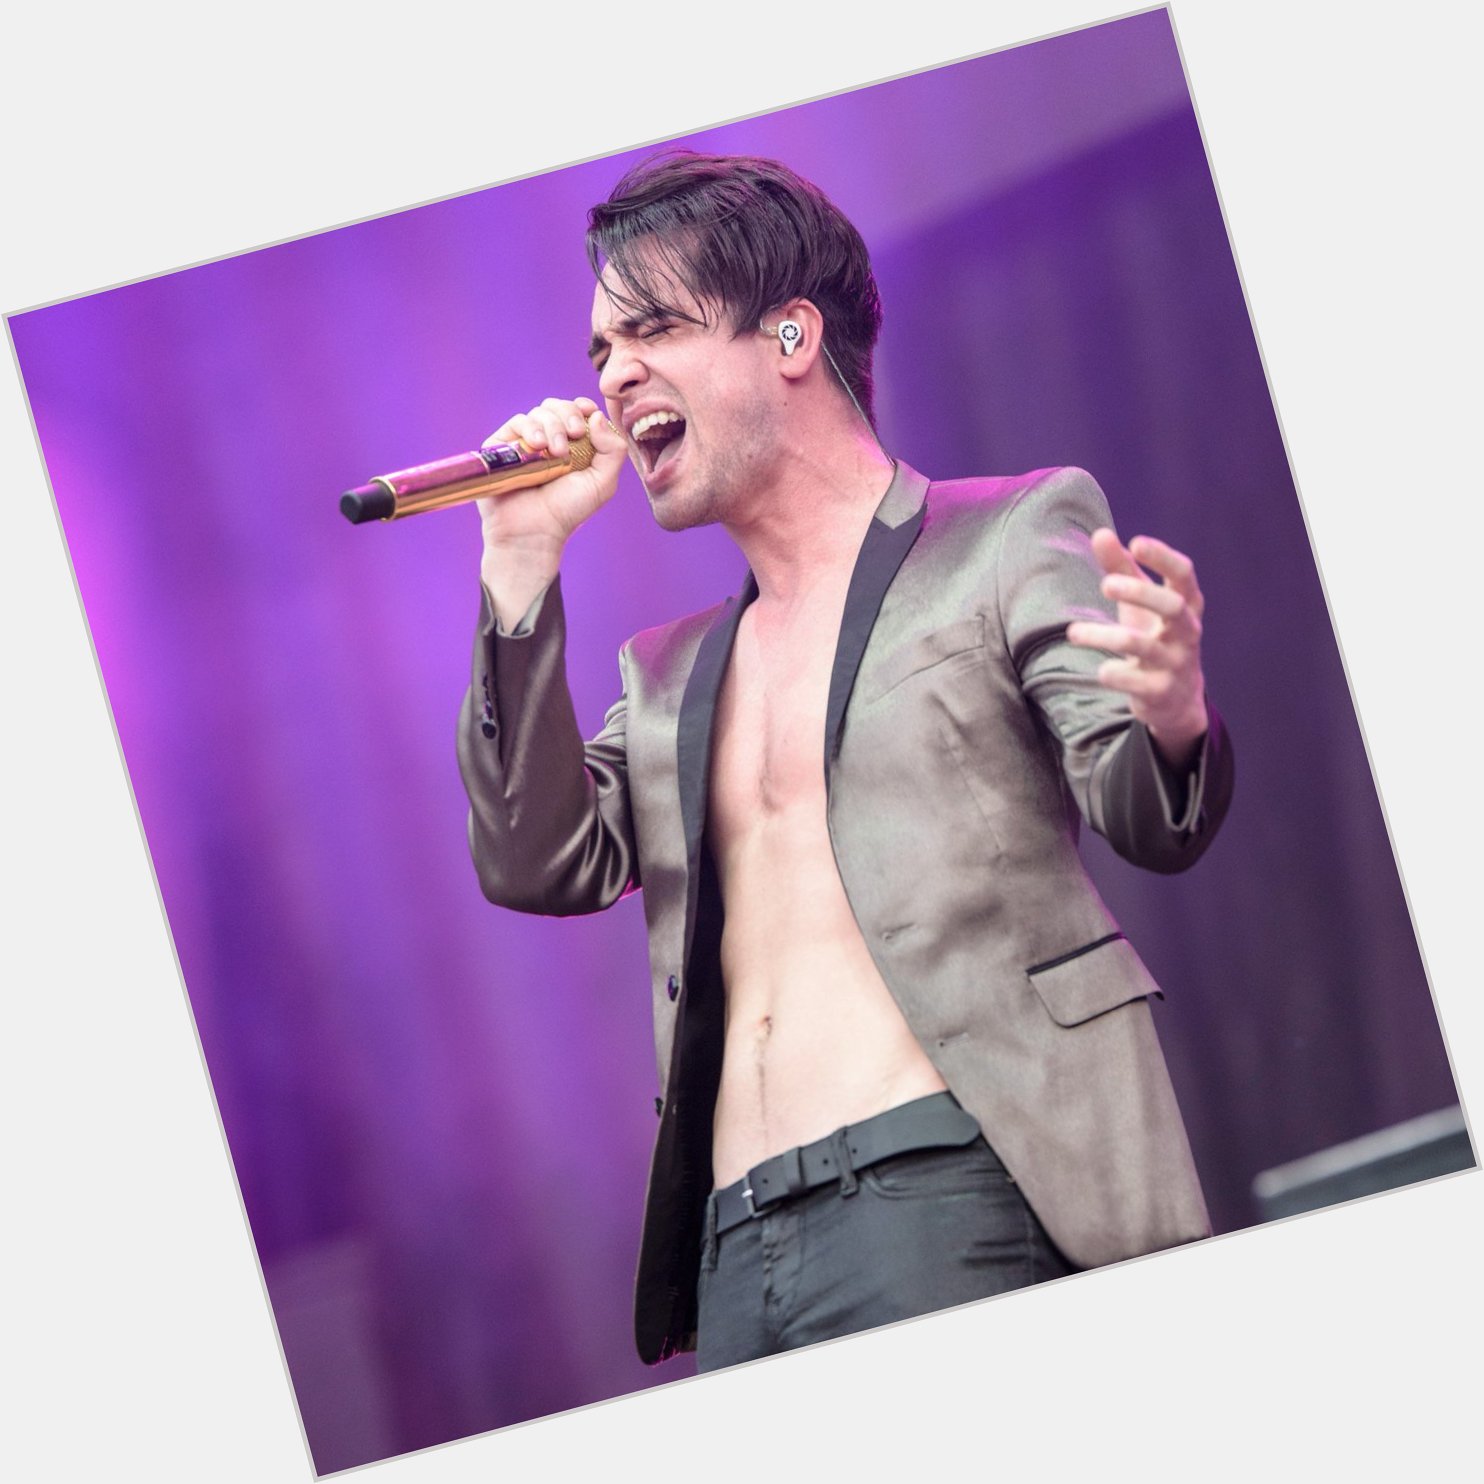 Happy 35th Birthday to Brendon Urie of Panic! at the Disco. New album soon? 